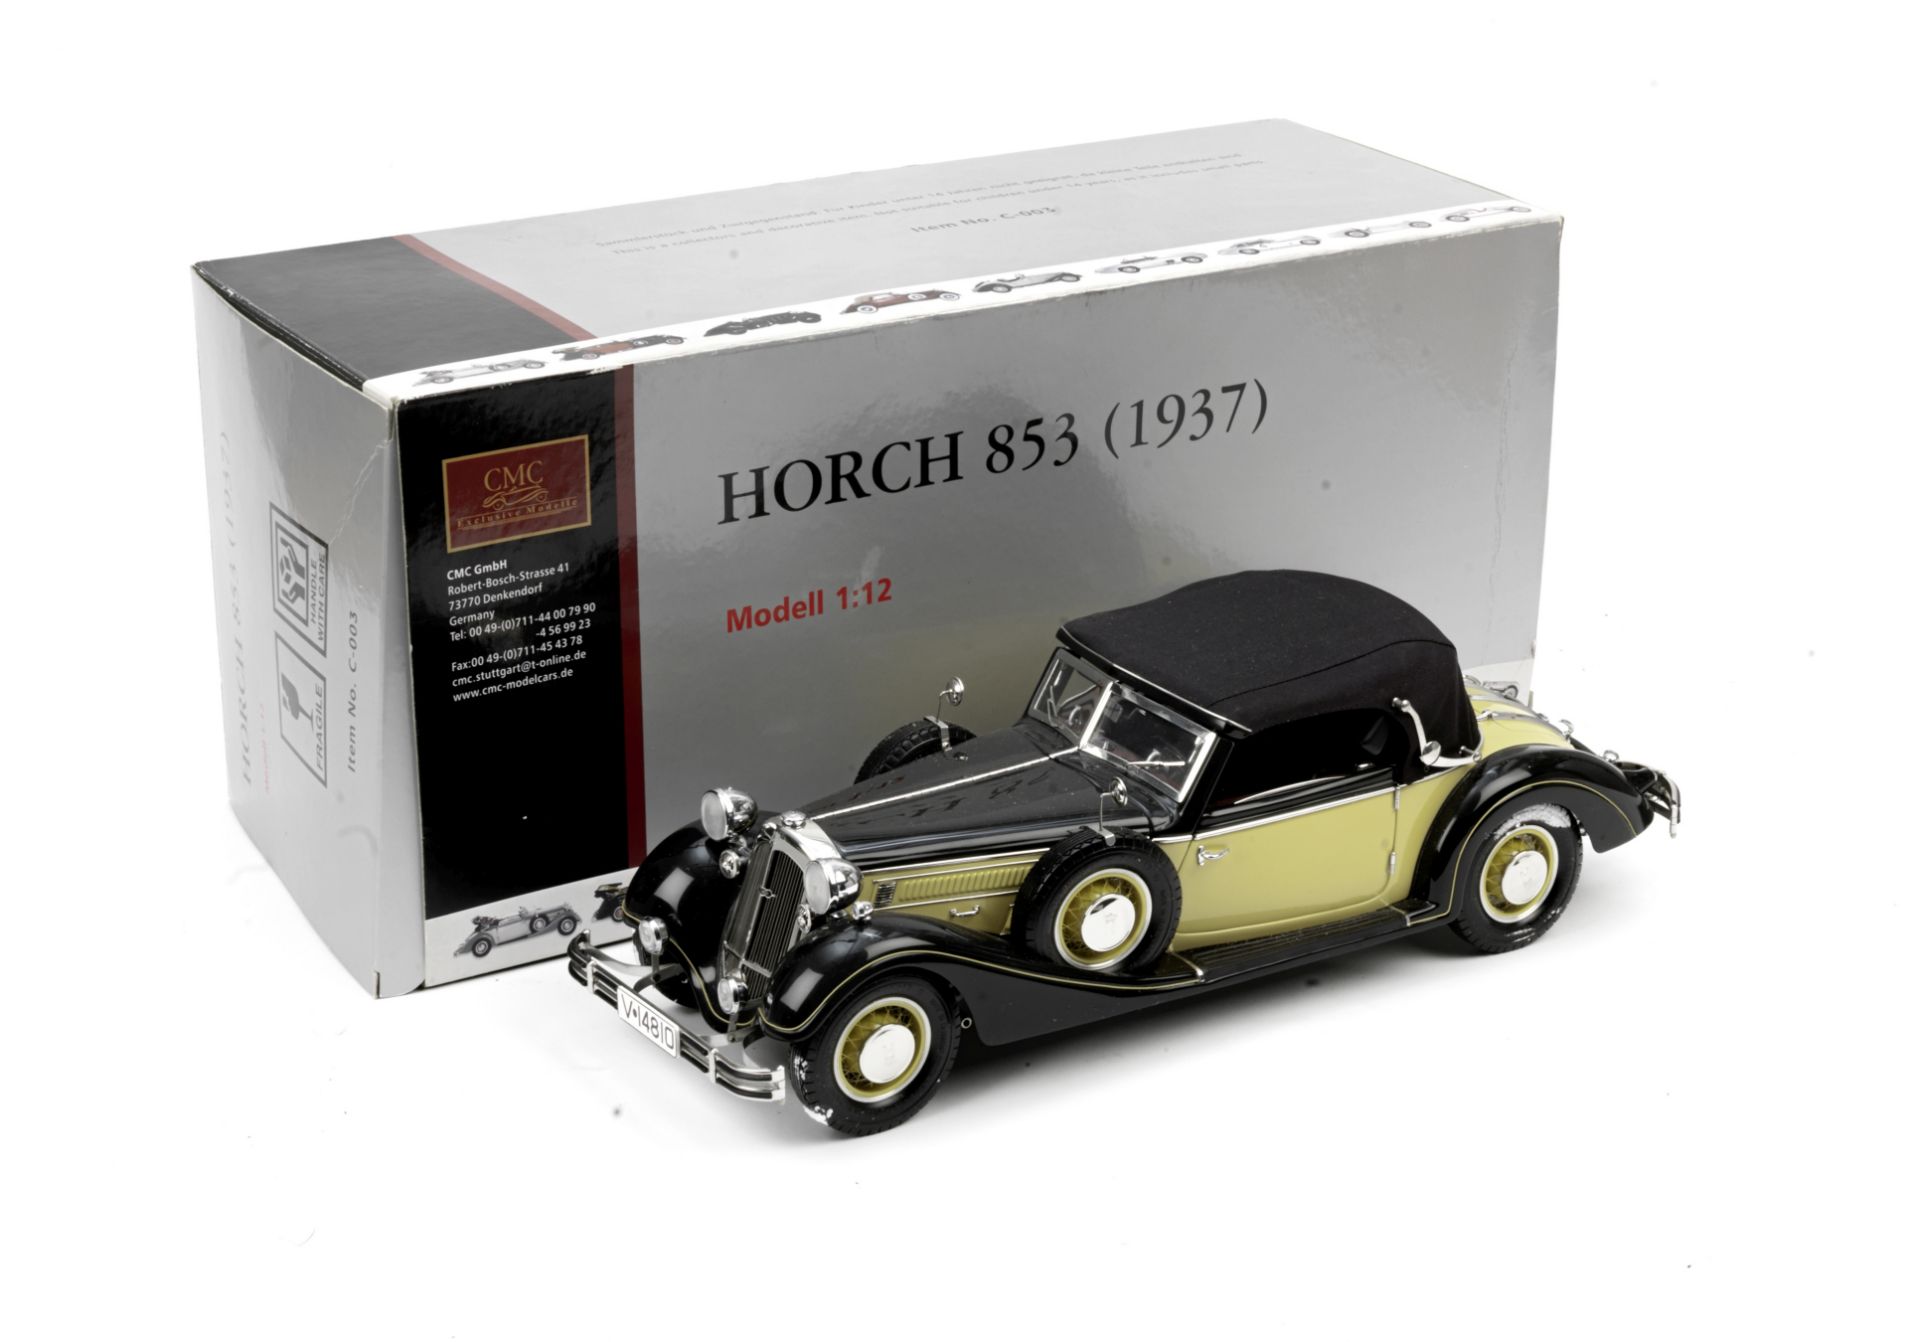 A boxed 1:12 scale model of a 1937 Horch 853, by CMC Models of Germany,